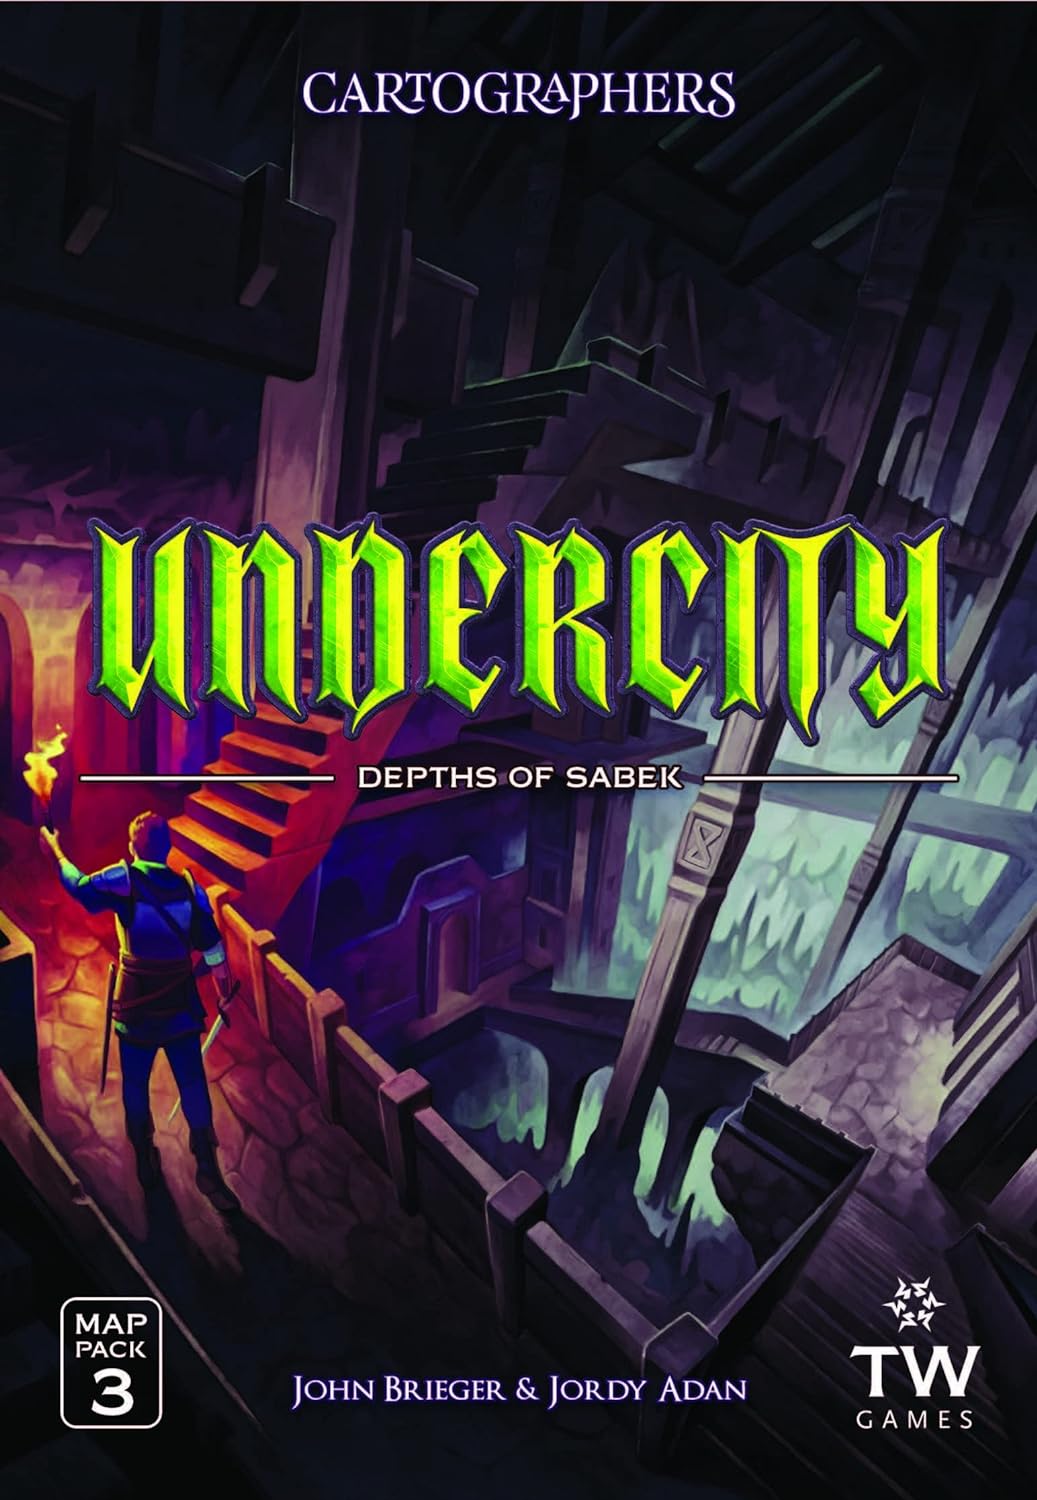 Cartographs Heroes: Map Pack 3: Undercity